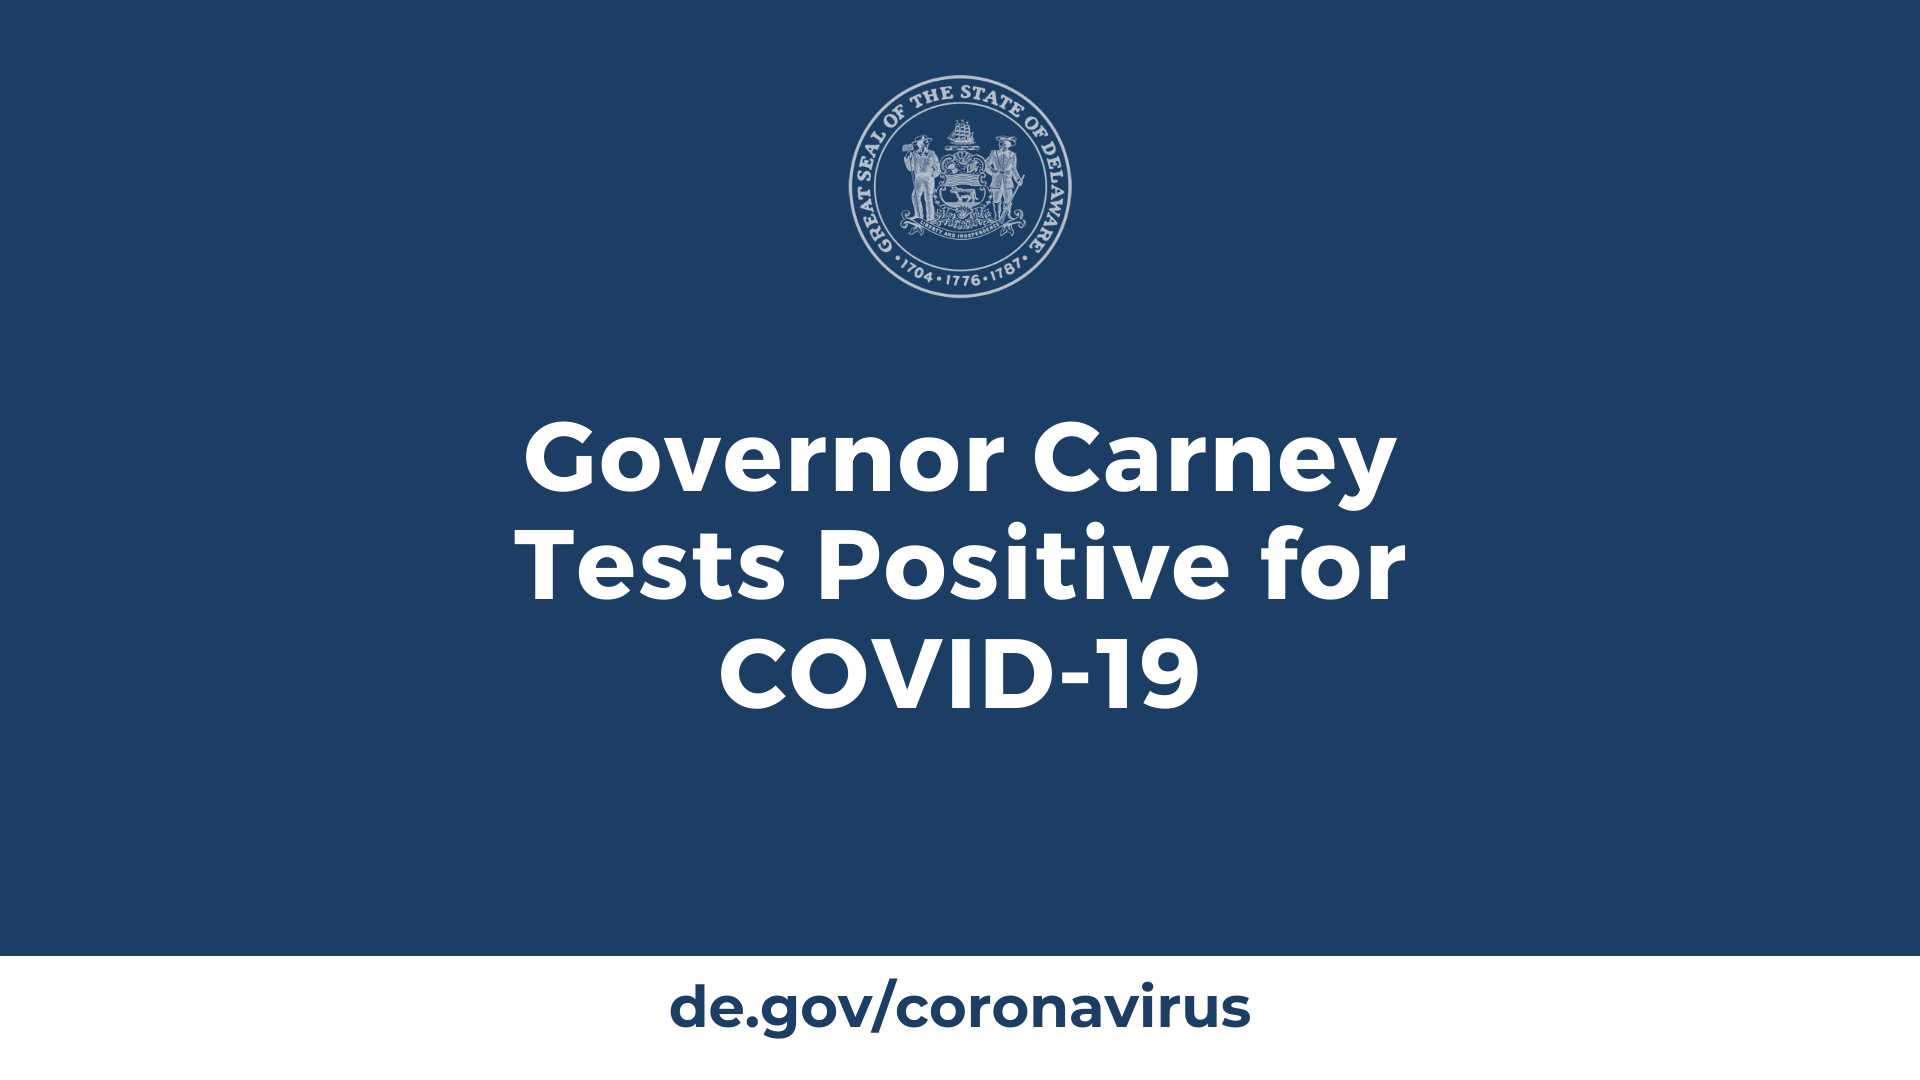 Governor Carney Tests Positive for COVID-19